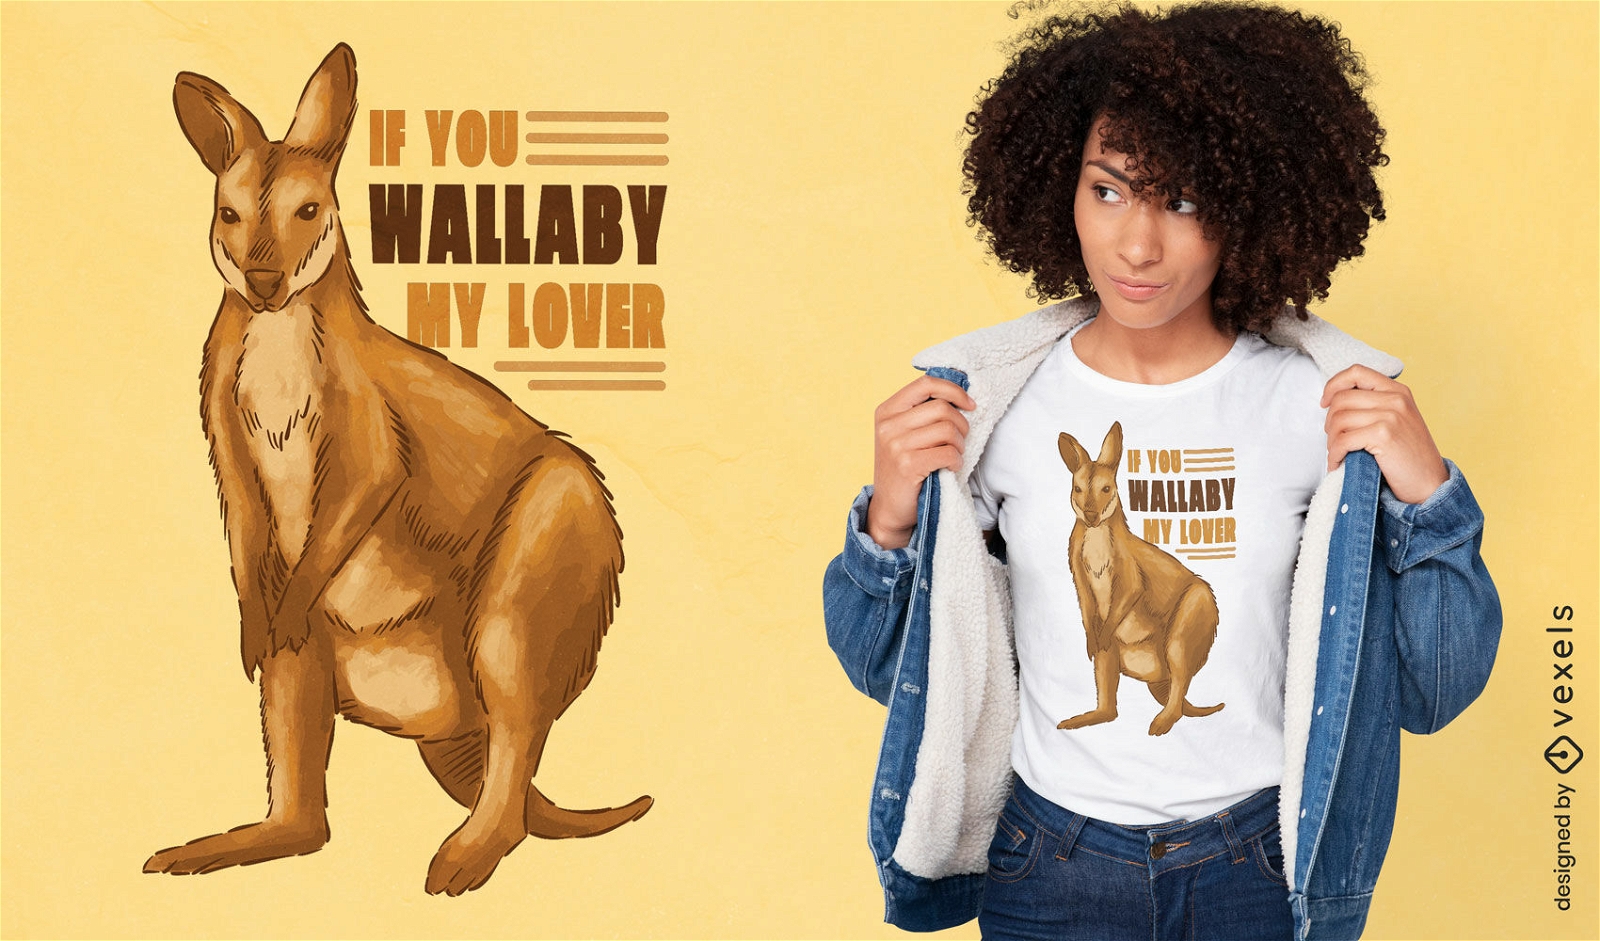 Wallaby my lover t-shirt design